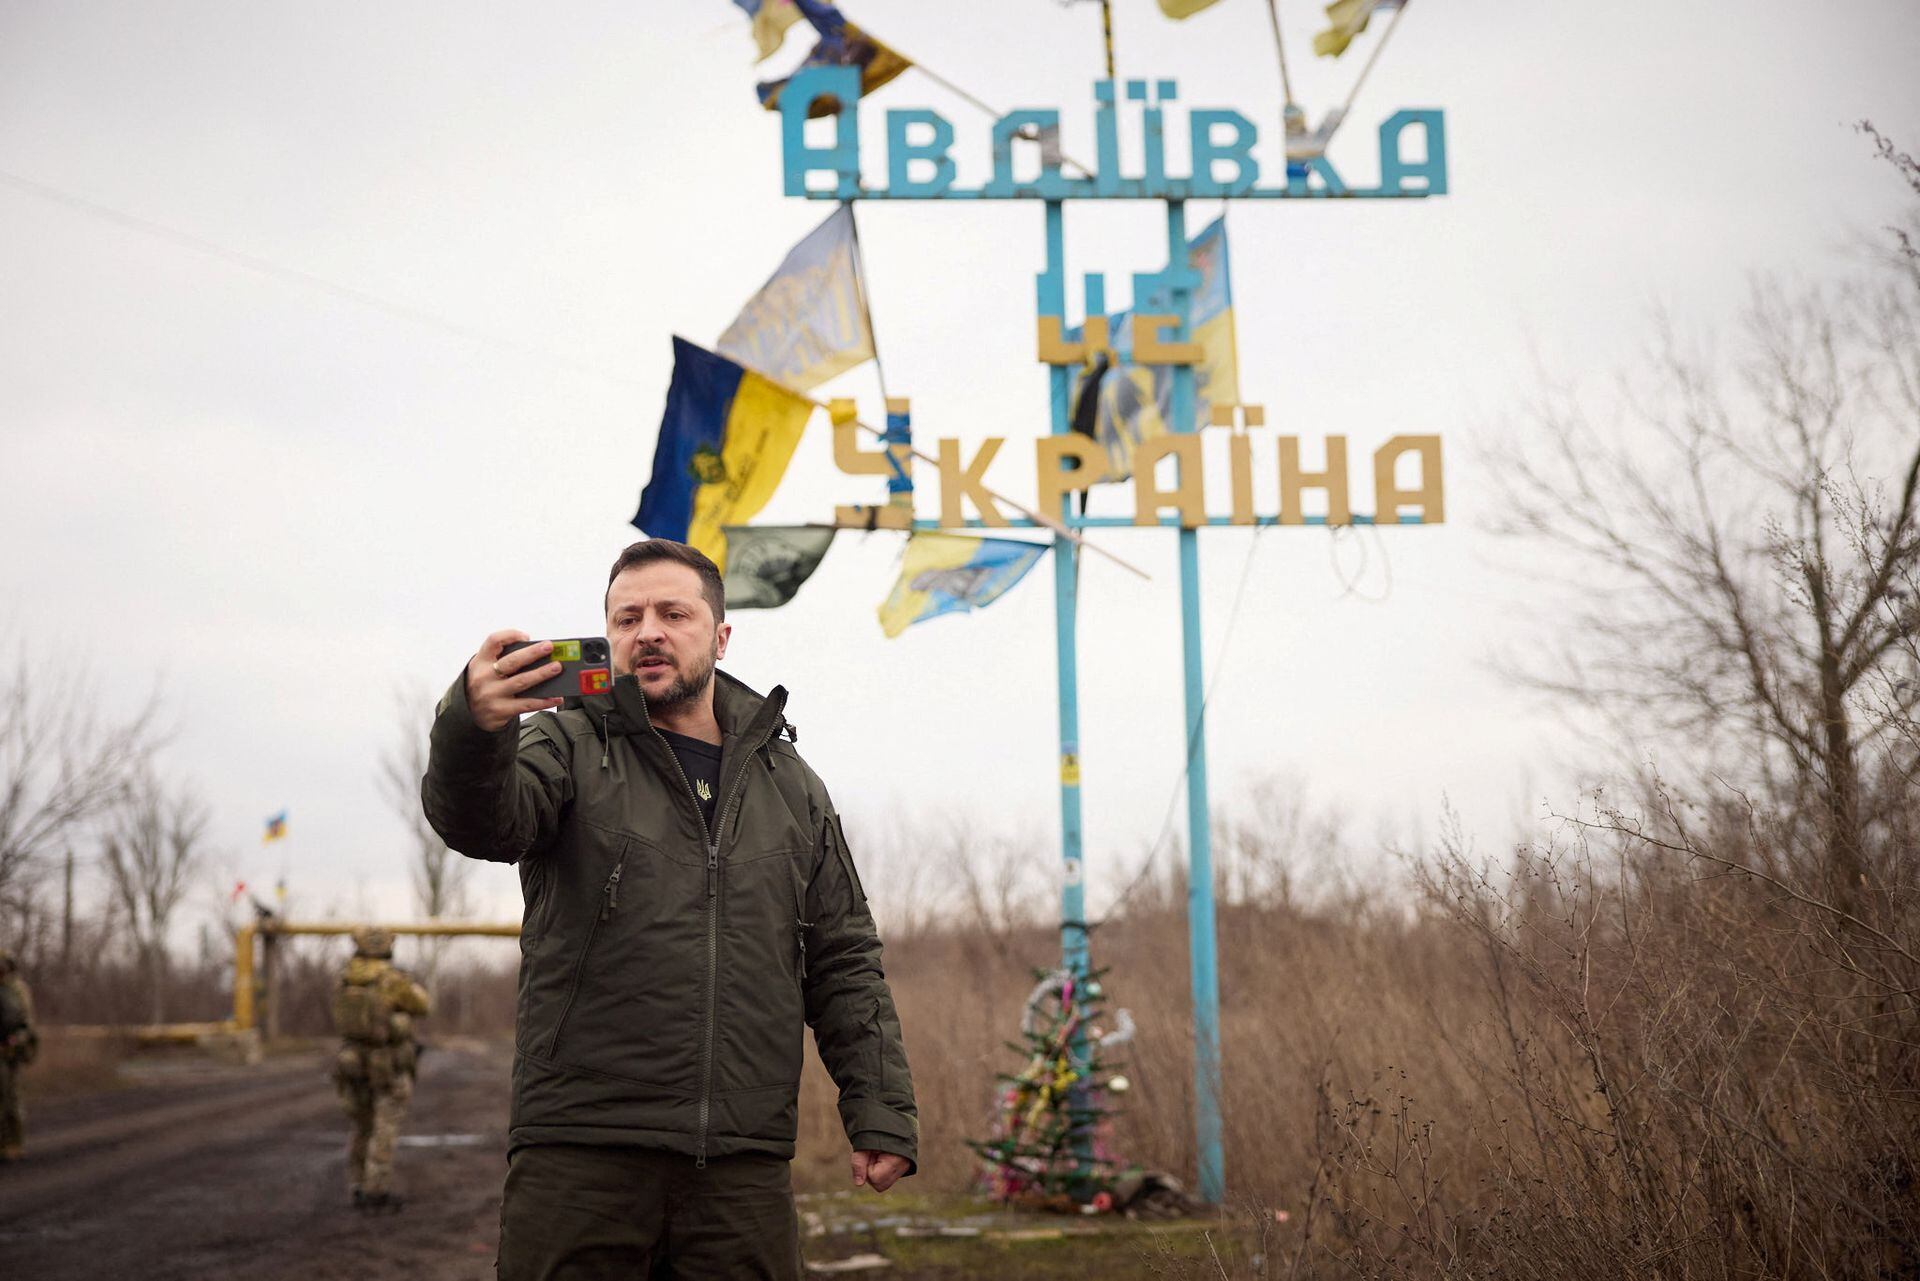 Ukraine’s President Volodymyr Zelensky takes a video in front of a road sign with the words ‘Avdiivka this is Ukraine’